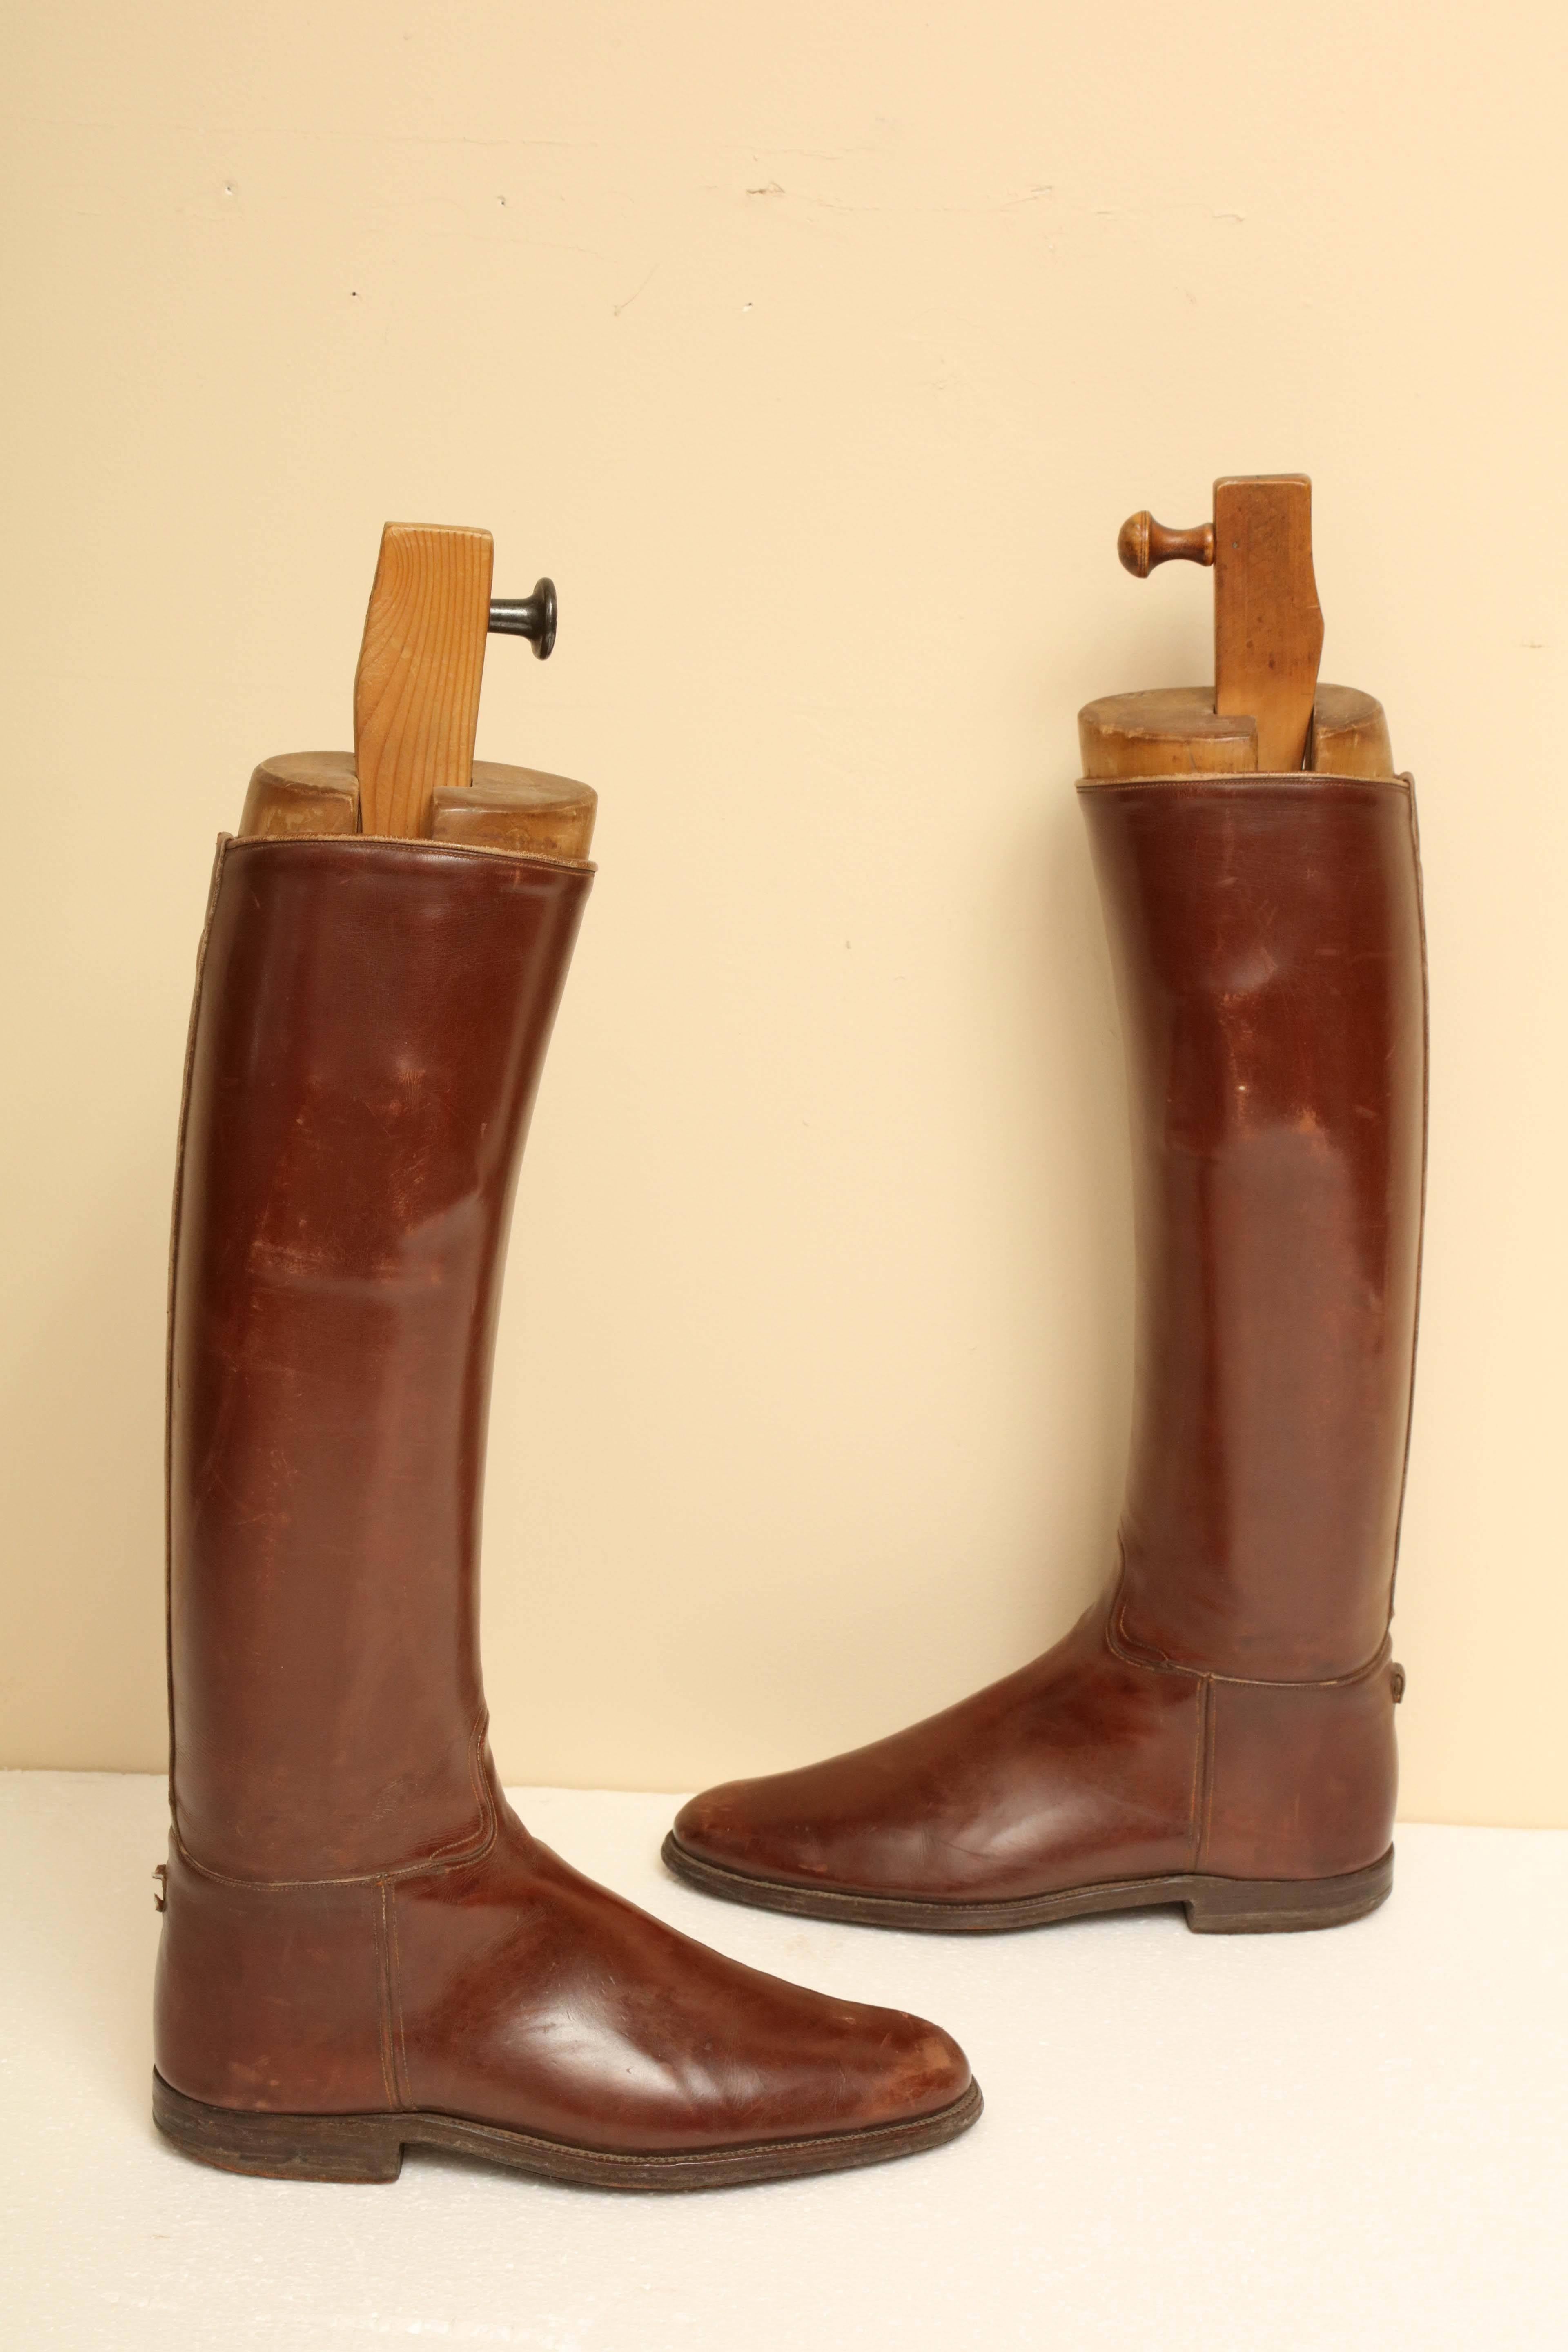 Pair of English Riding Boots with Custom Boot Trees 1